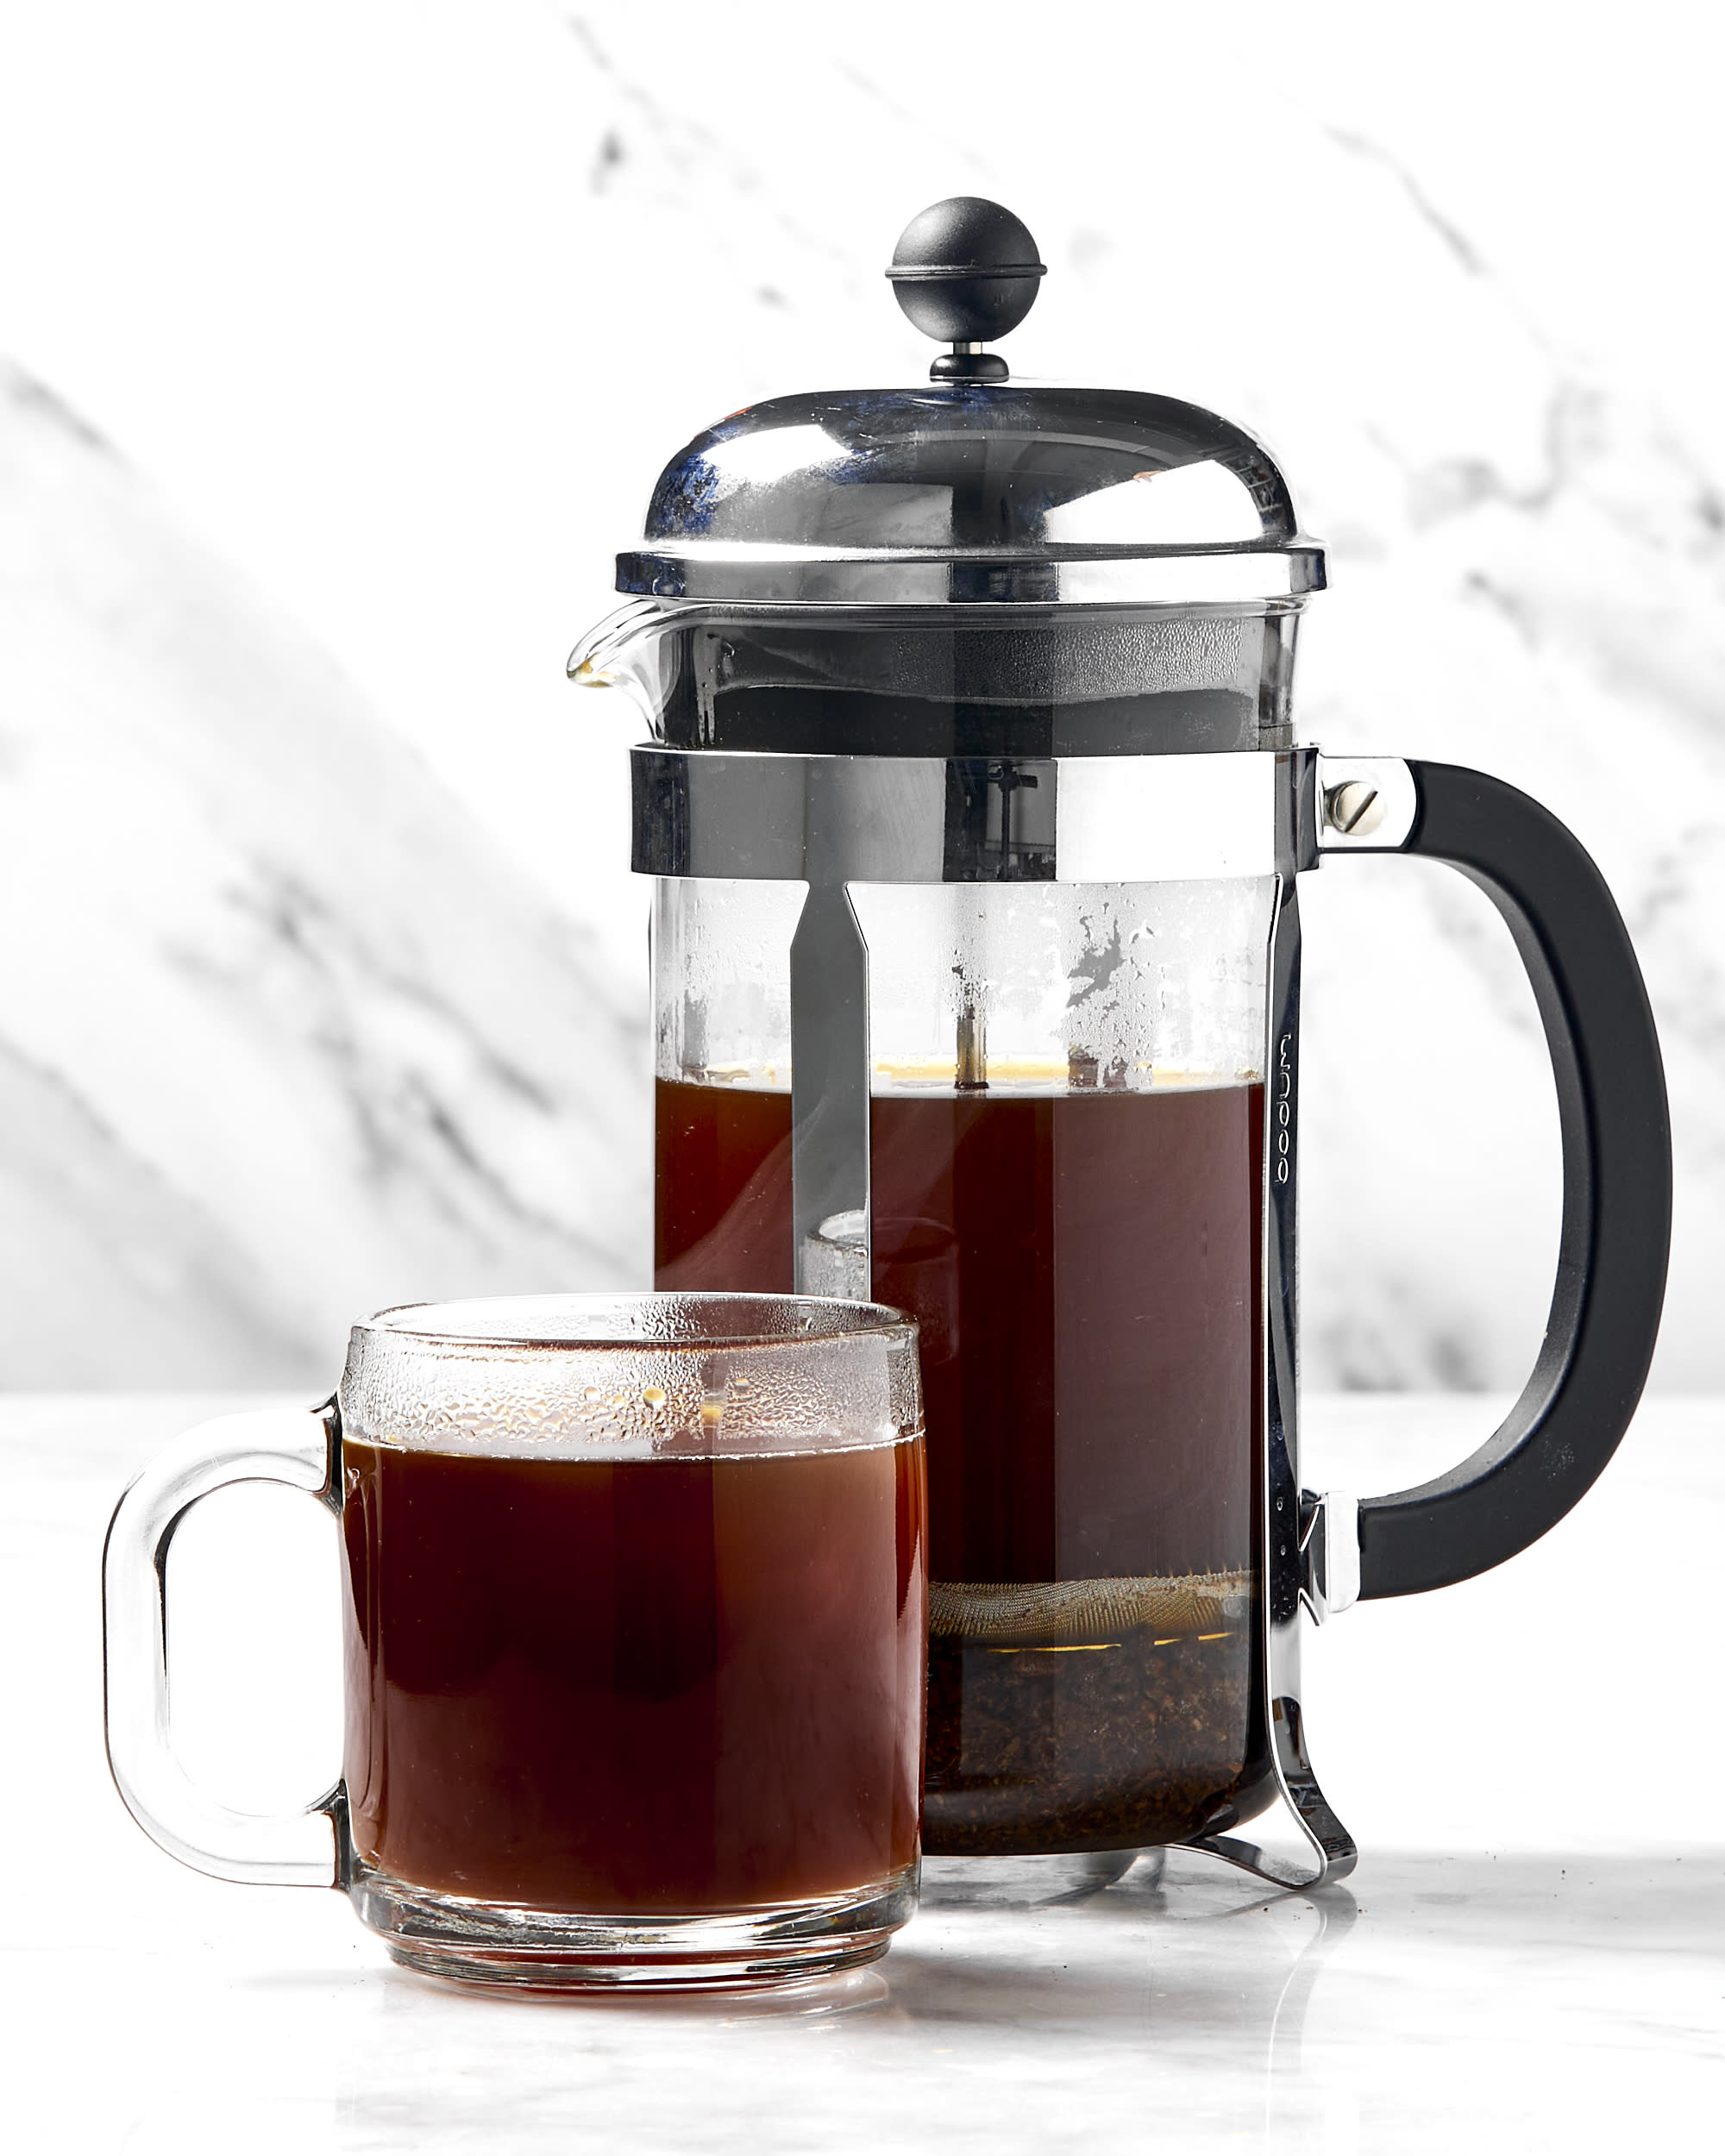 How To Make French Press Coffee: Step-by-Step Instructions